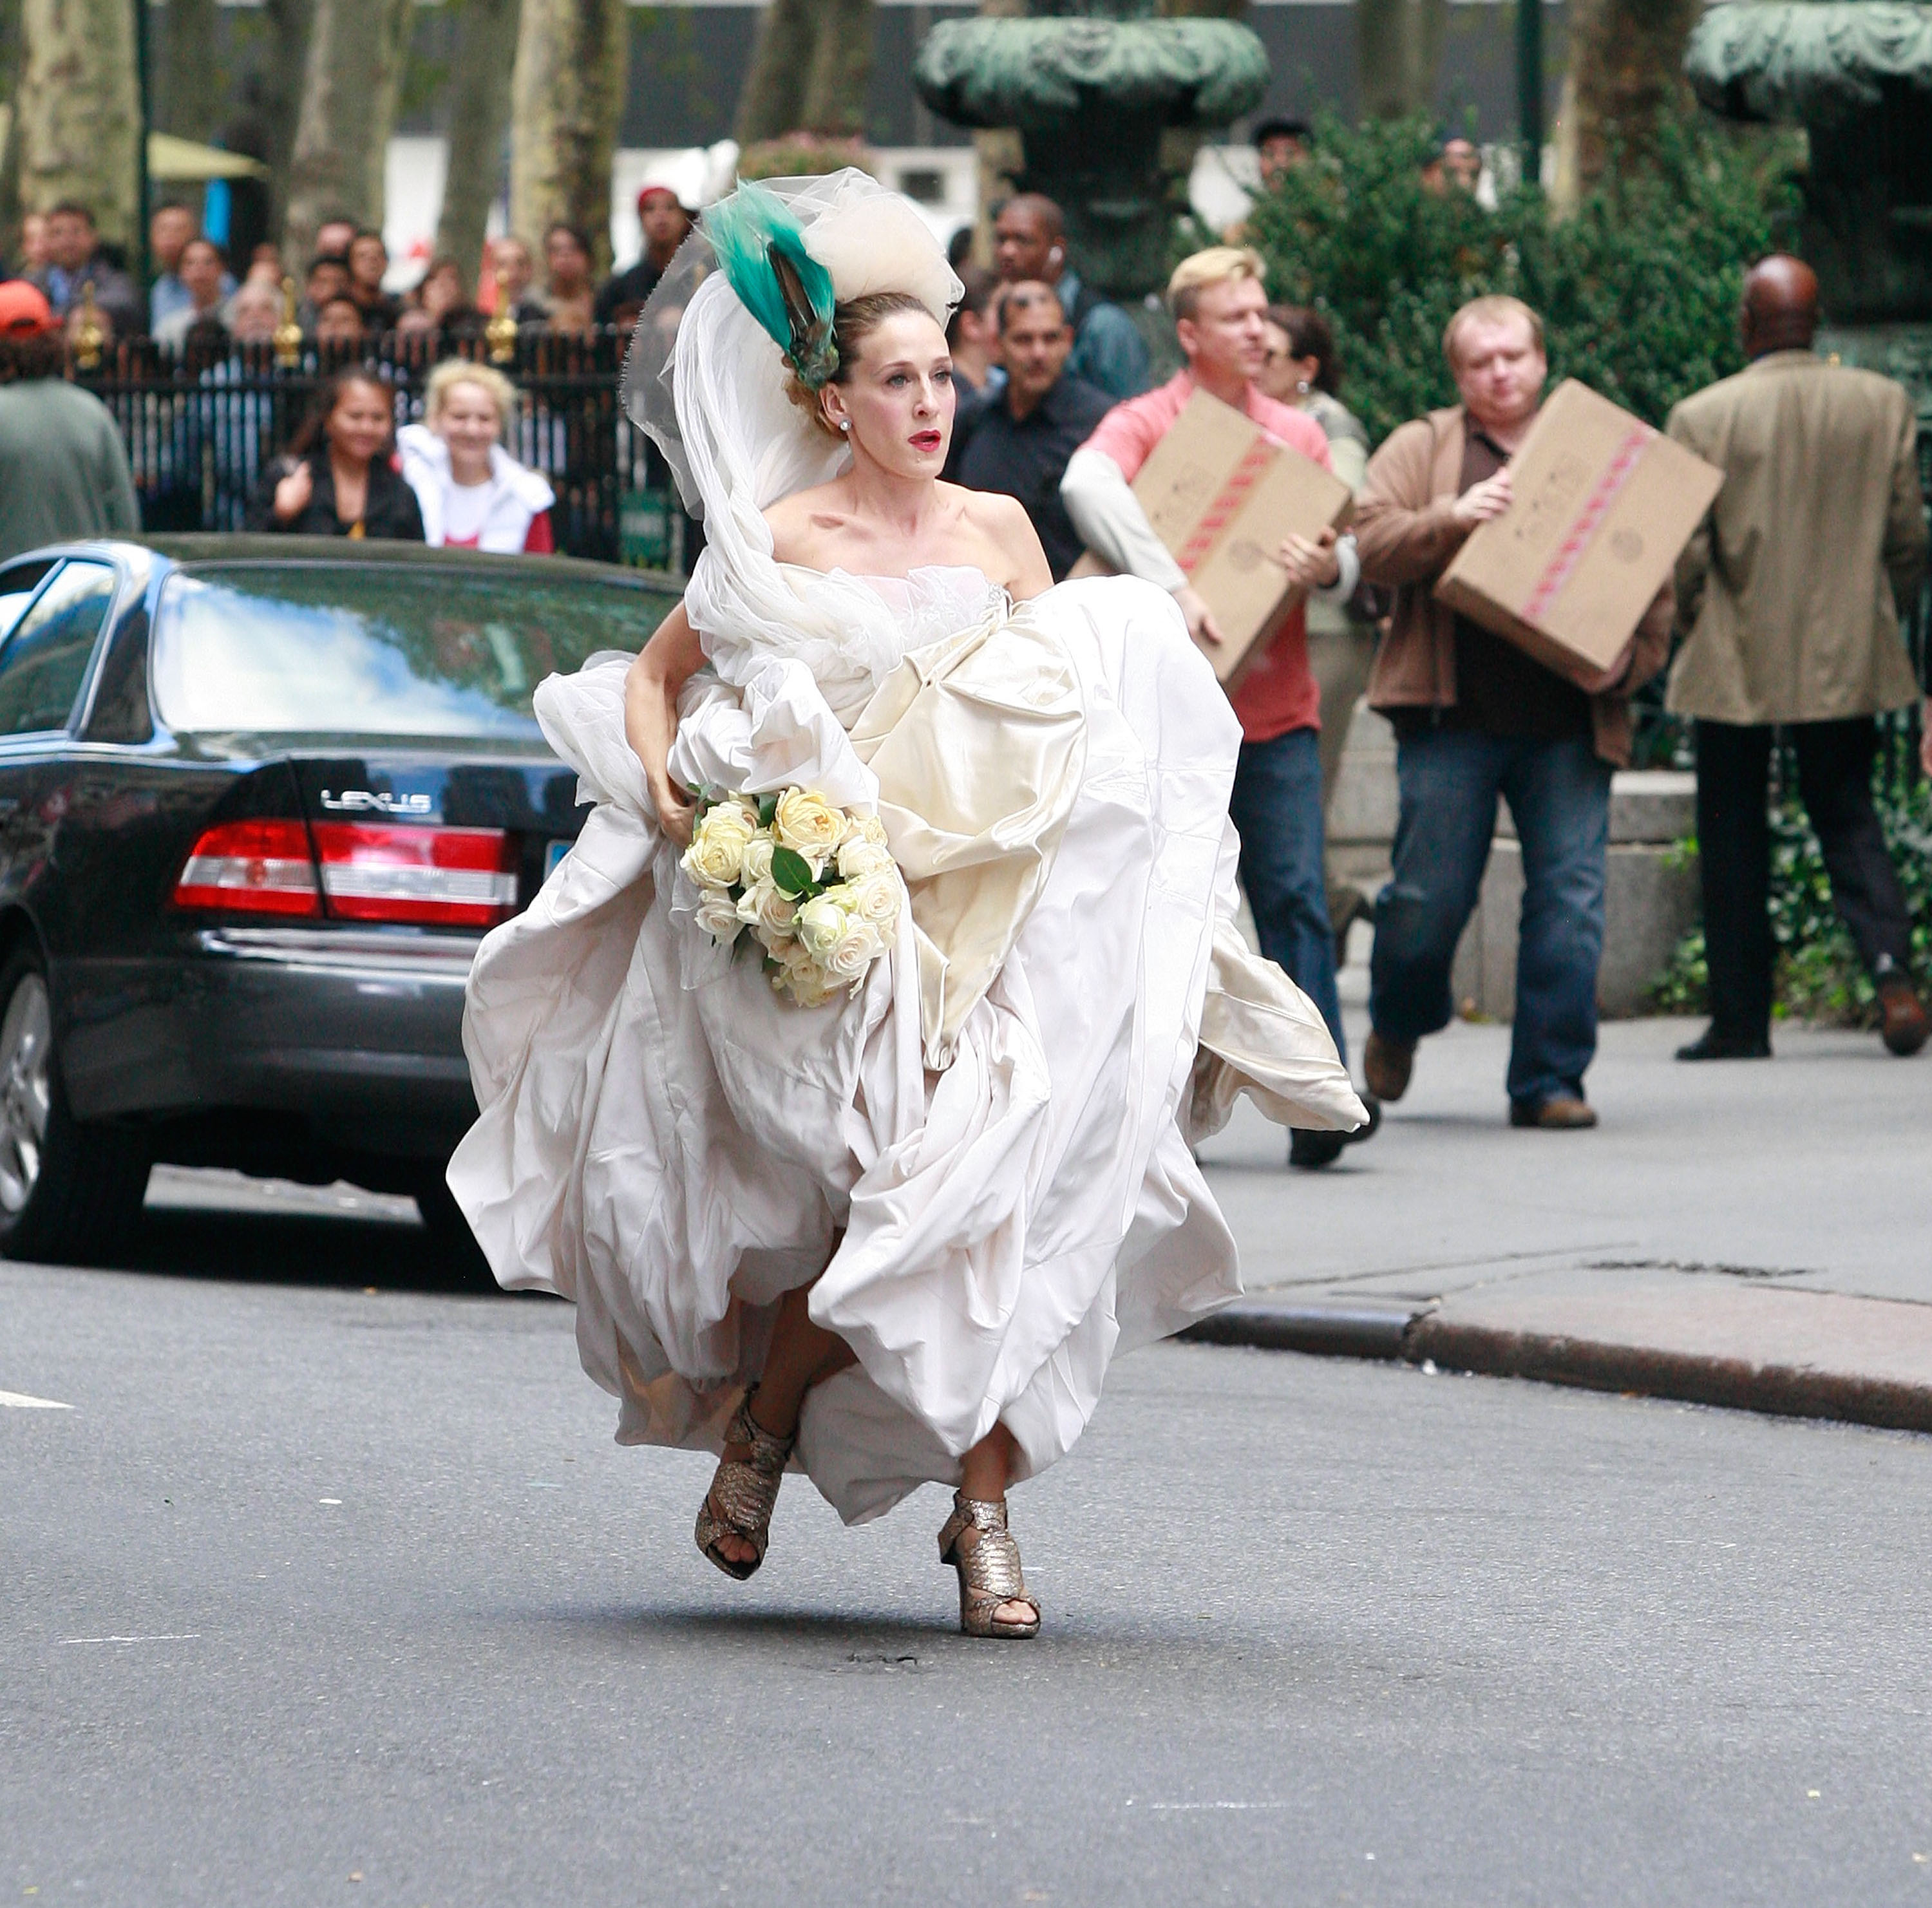 Sarah Jessica Parker is seen running down the street in her Vivienne Westwood wedding gown during the filming of 'Sex and the City: The Movie'